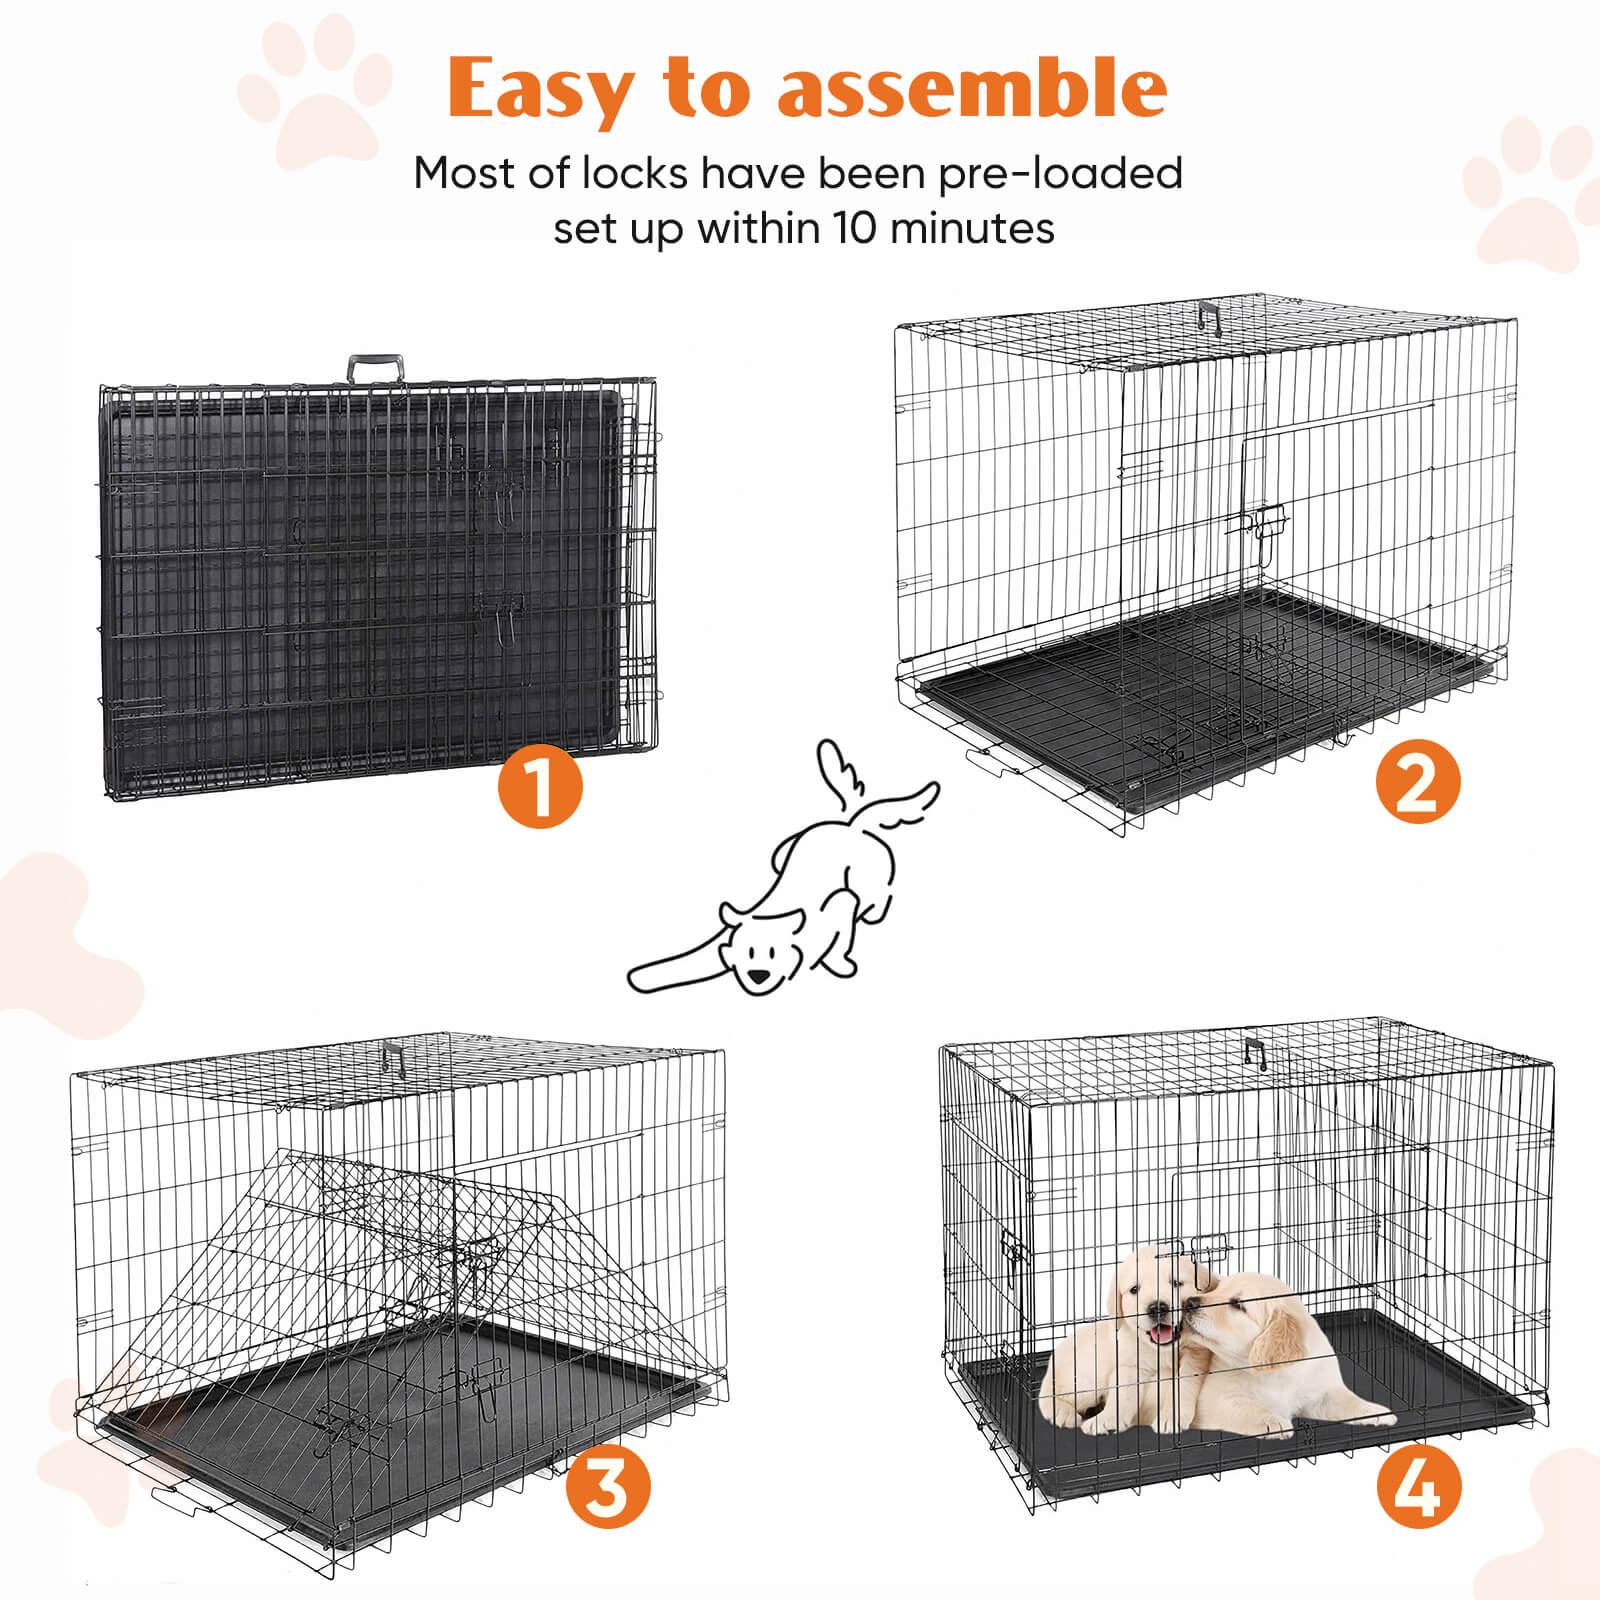 Dog Crate-24/30/36/42/48 inch, Double Door Dog Cage with Divider Panel and Plastic Leak-Proof Pan Tray, foldable, easy to carry, suitable for indoor, outdoor, travel use.